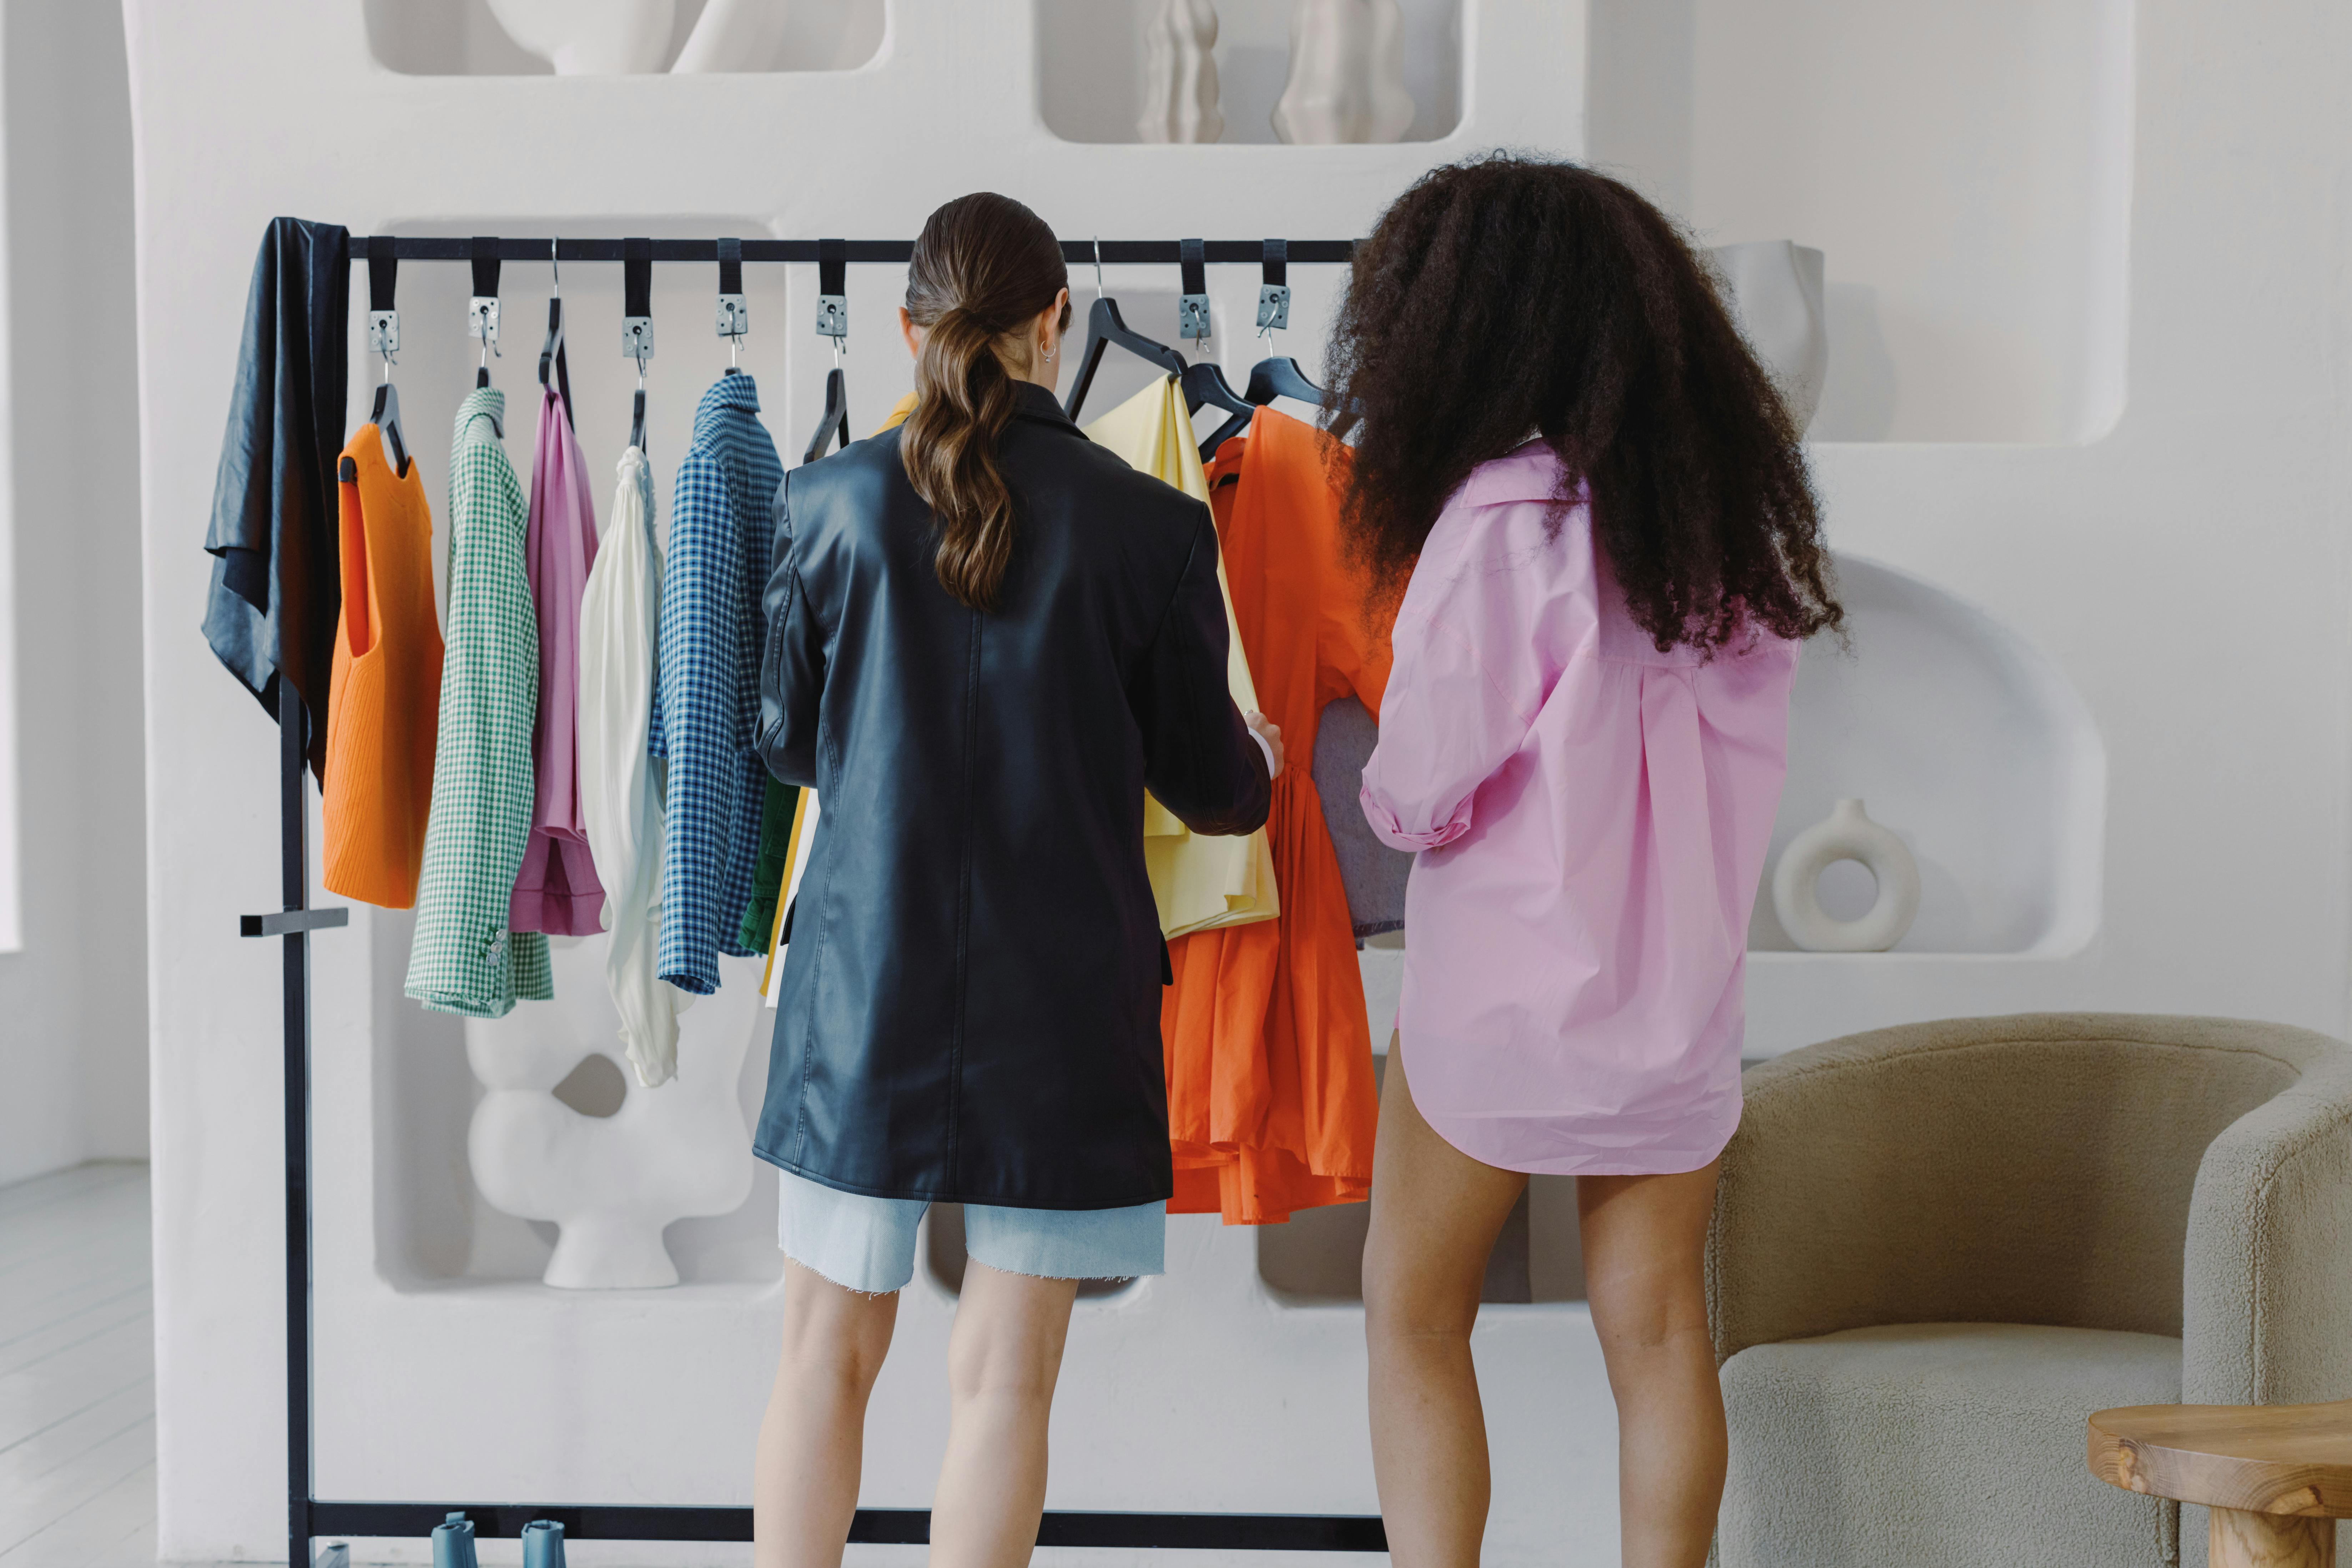 Women looking at clothes on rack | Source: Pexels